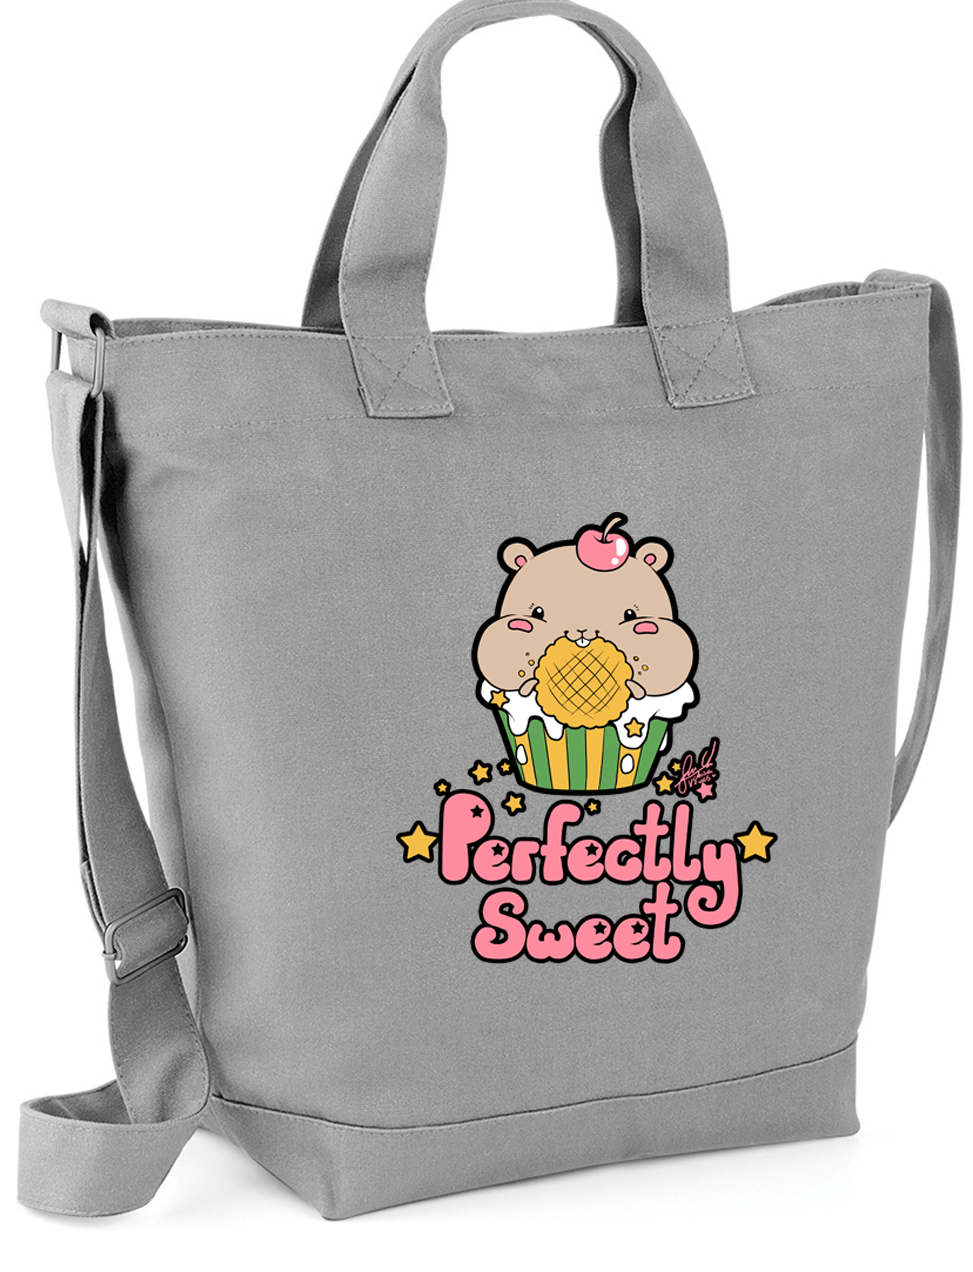 Perfectly Sweet - Shopperbag